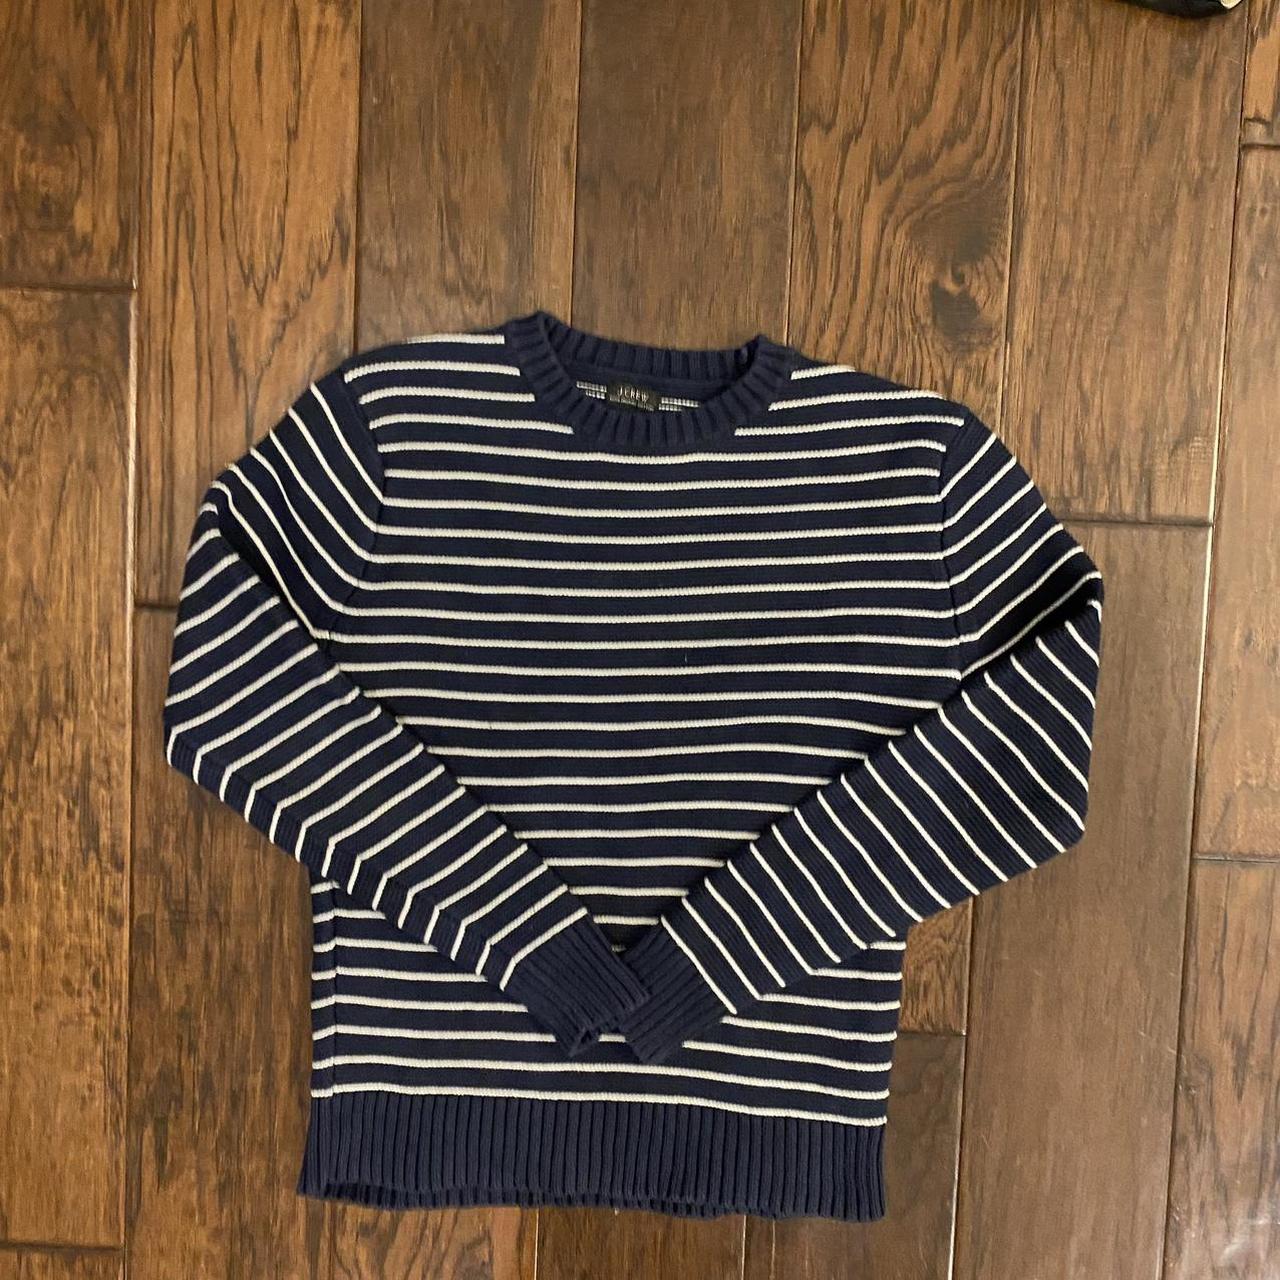 navy and white striped j. crew sweater It is very... - Depop